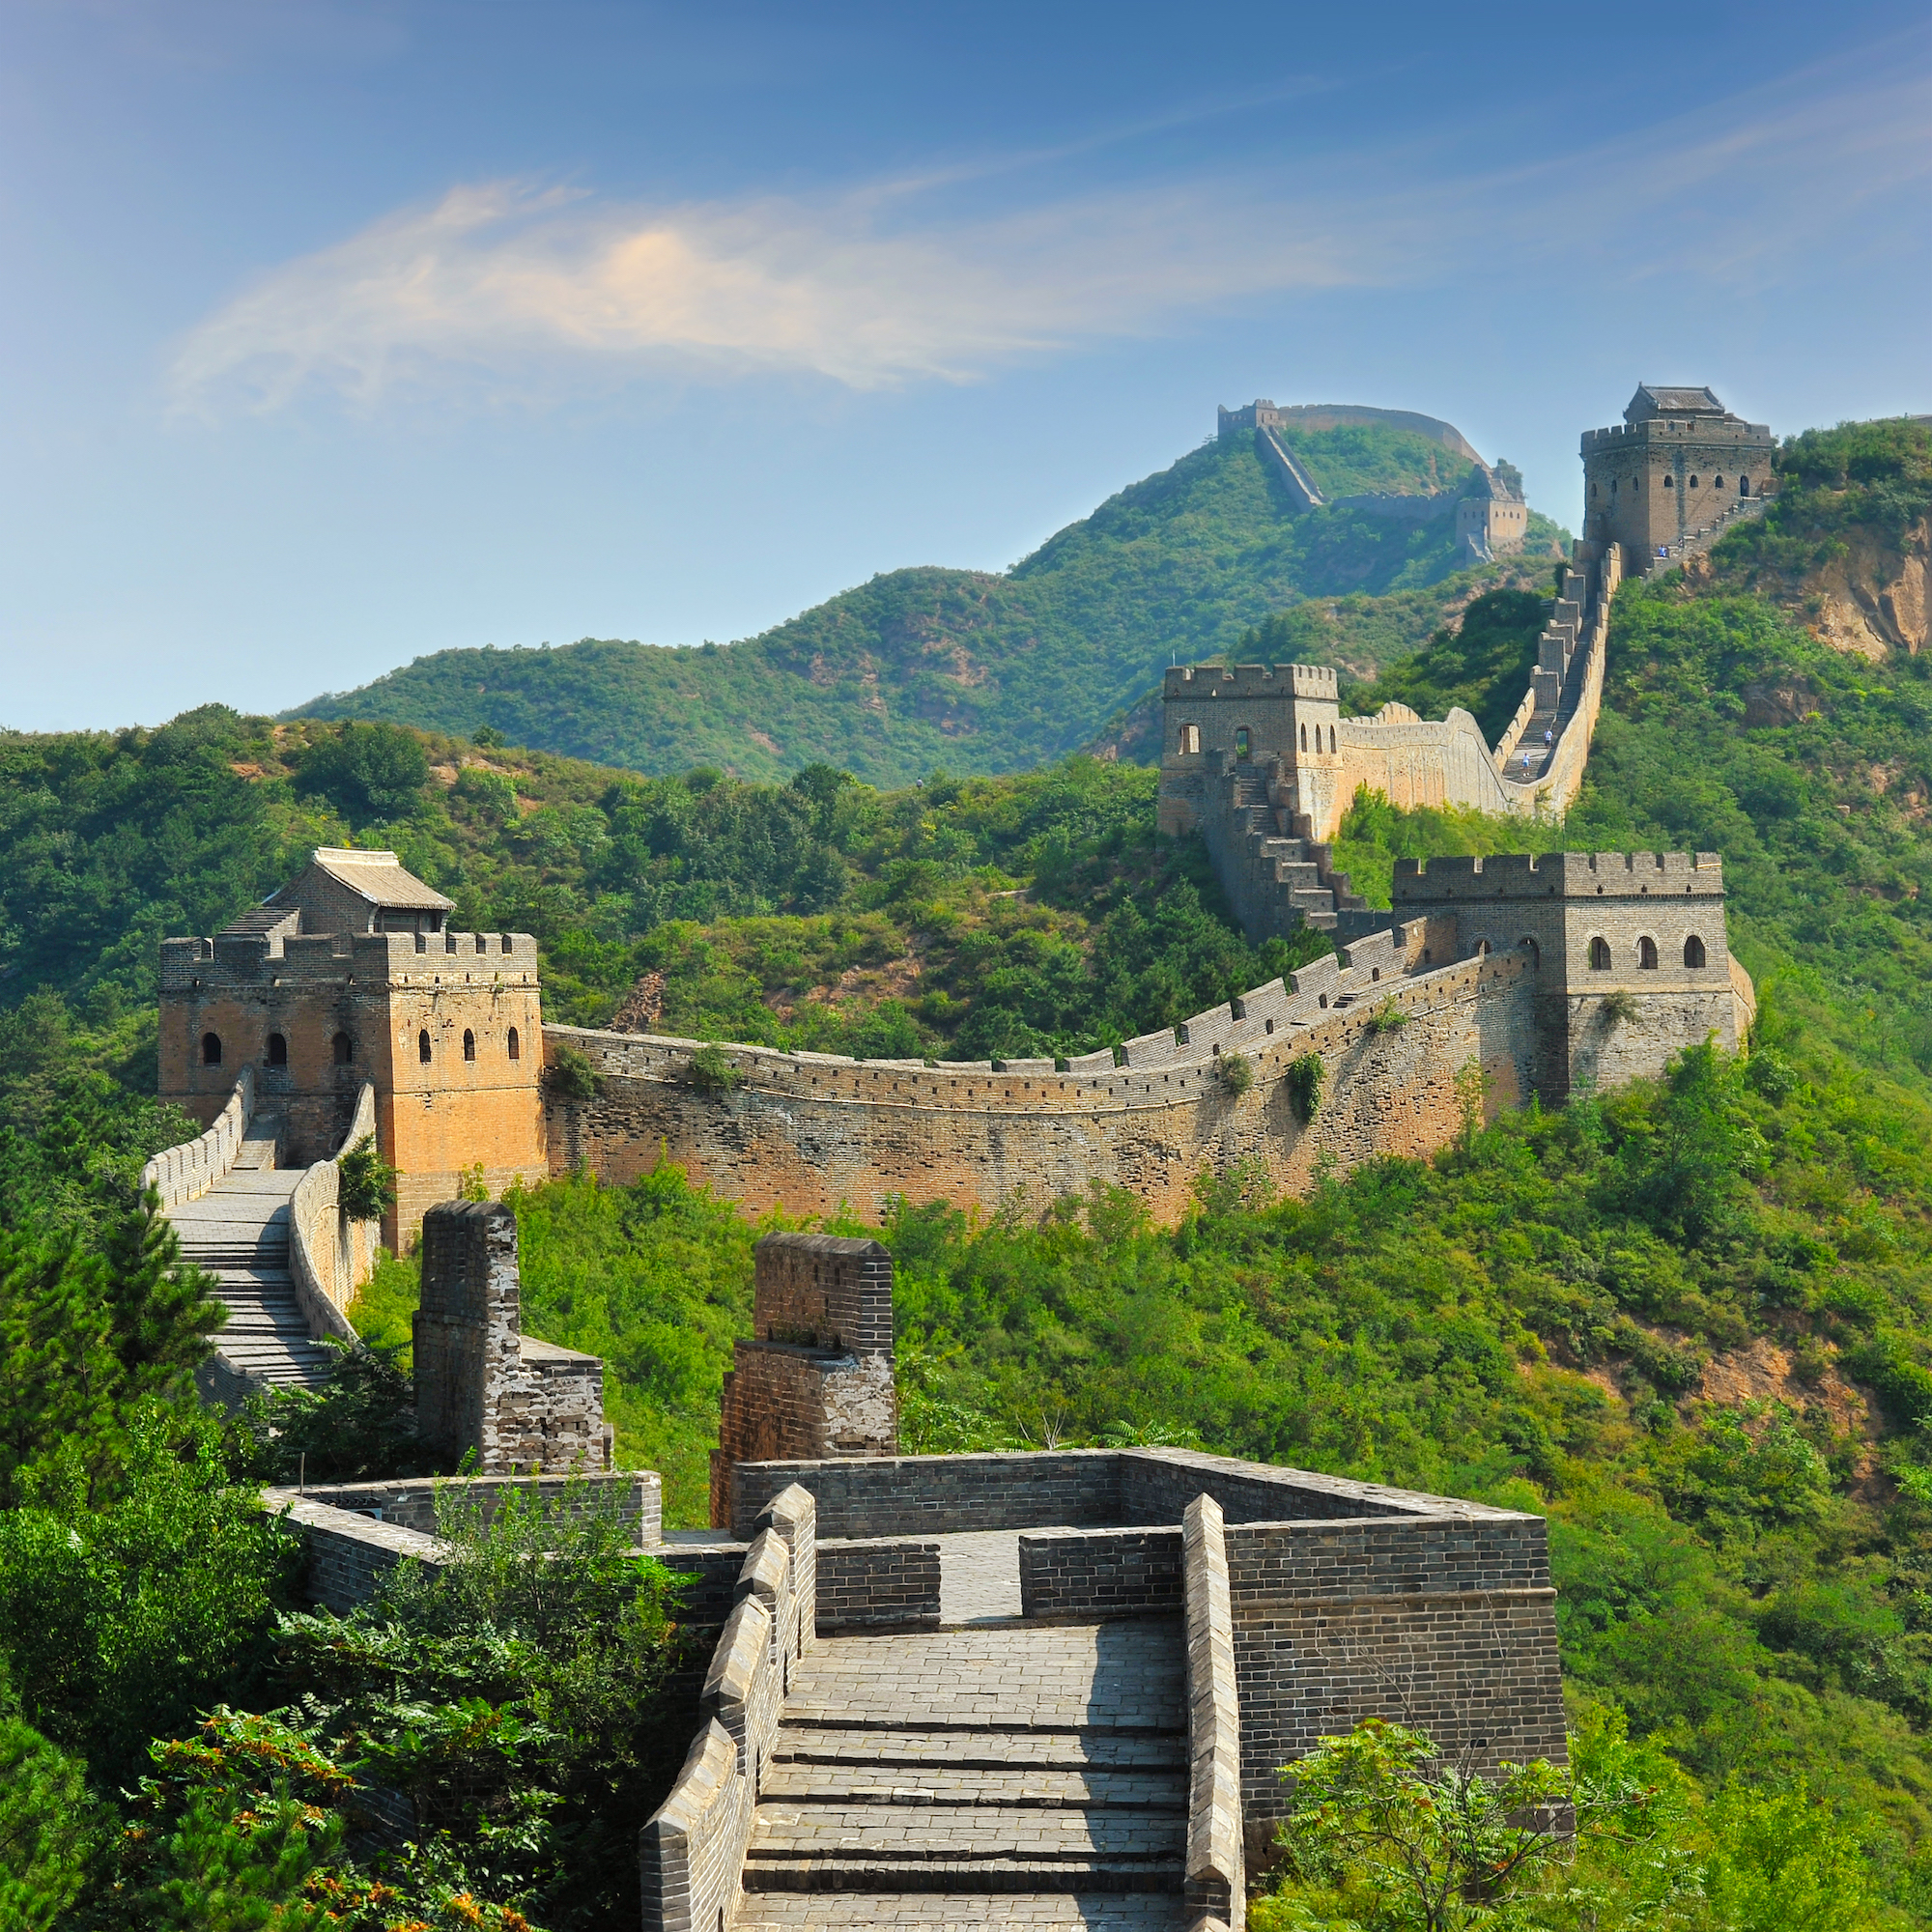 The Great Wall of China image